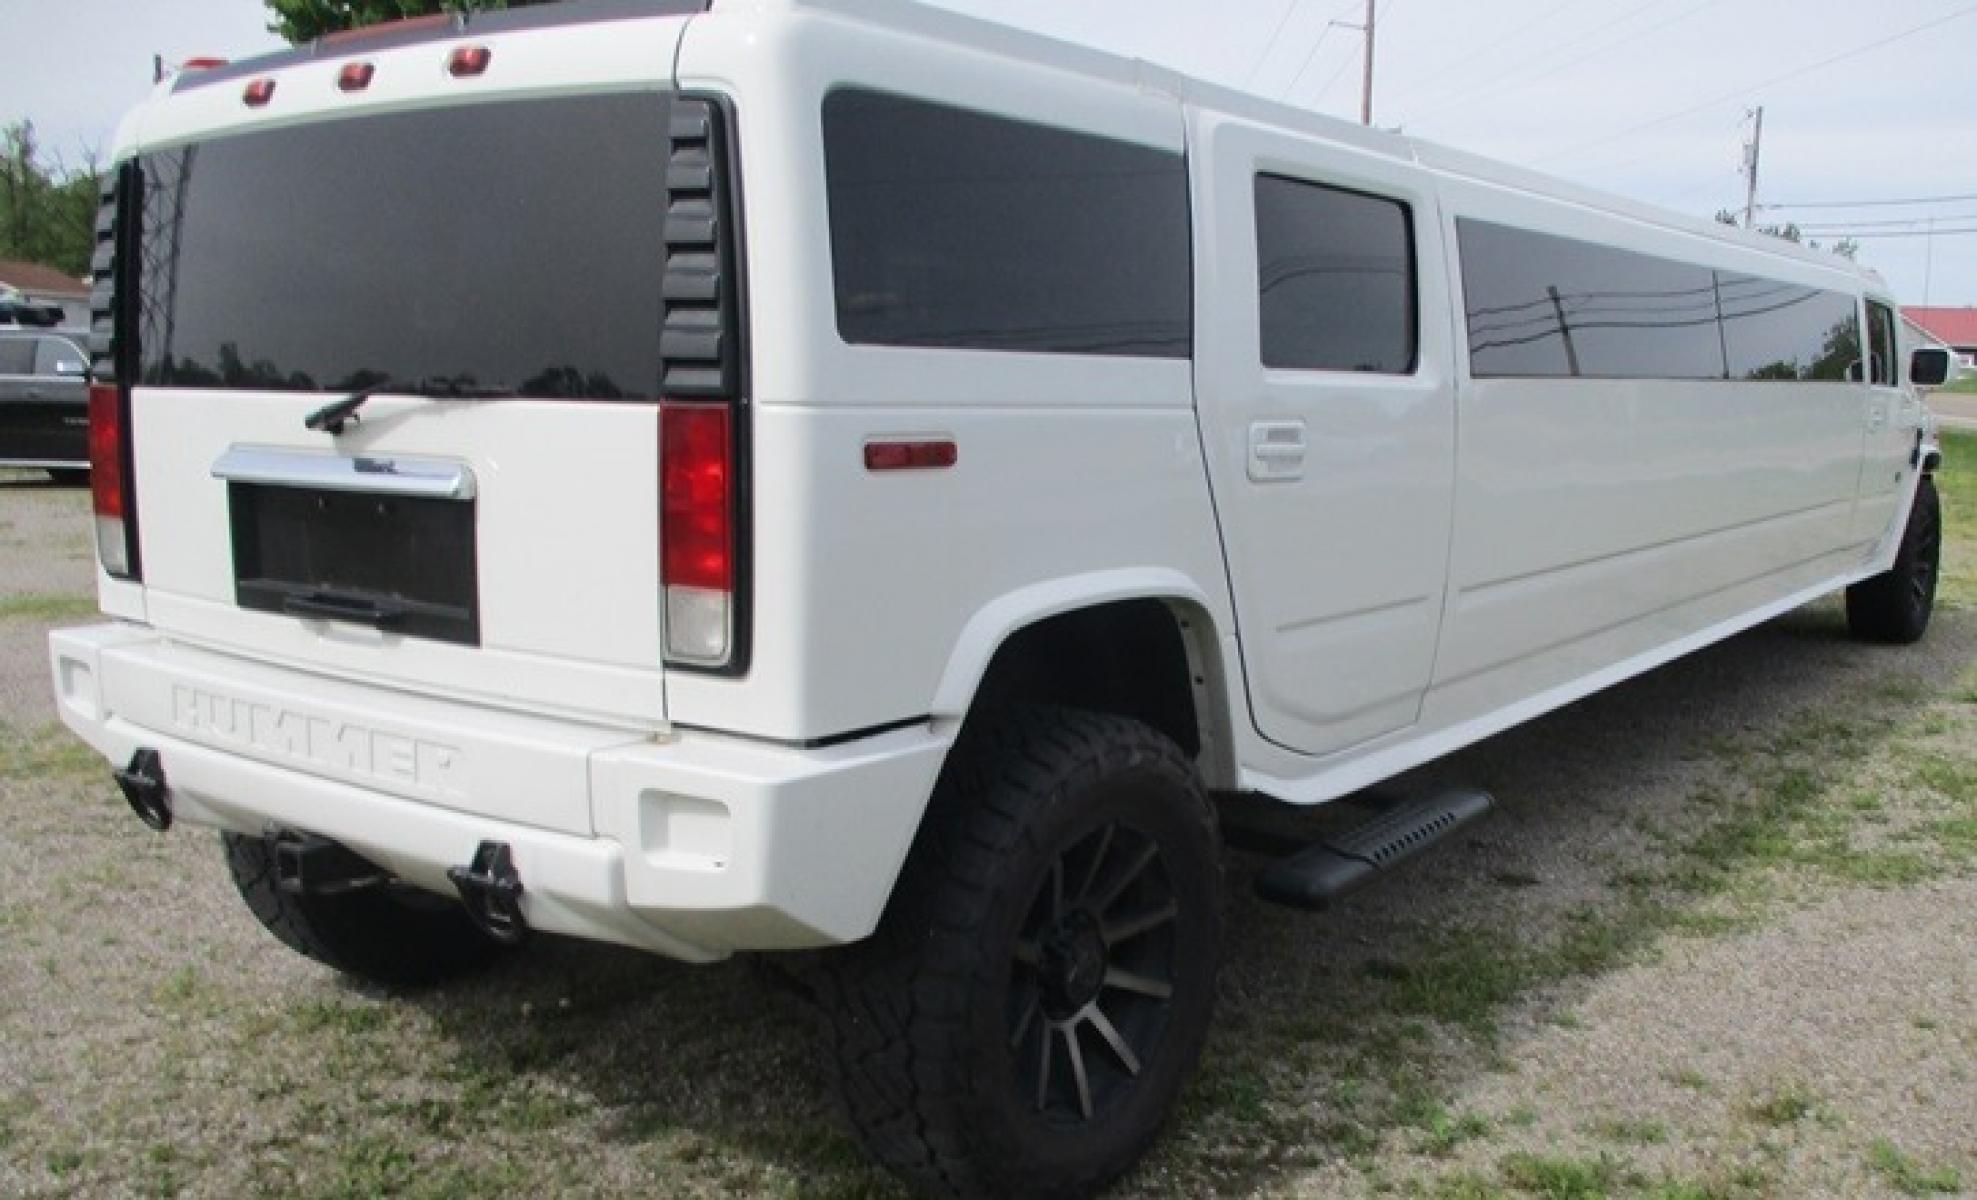 2005 White /White/Black Hummer H2 , located at 1725 US-68 N, Bellefontaine, OH, 43311, (937) 592-5466, 40.387783, -83.752388 - 2005 Hummer H2 175" SUV VIP Limousine, White w/White/black leather interior, Front/Rear Ait, Flat Screens, AM/FM/CD reconditioned Interior, LOADED - Photo #1